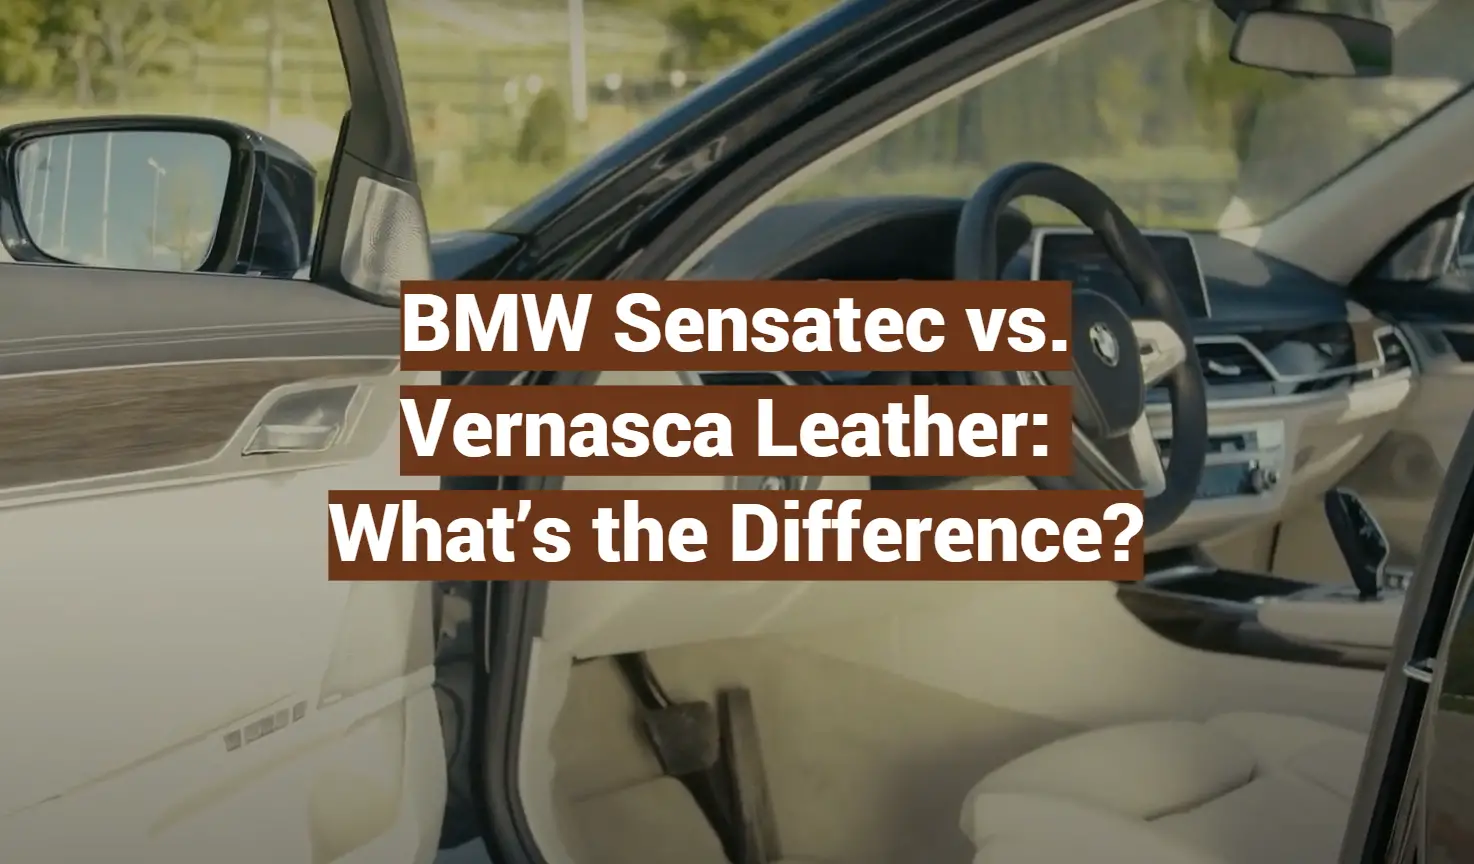 BMW Sensatec vs. Vernasca Leather: What’s the Difference?